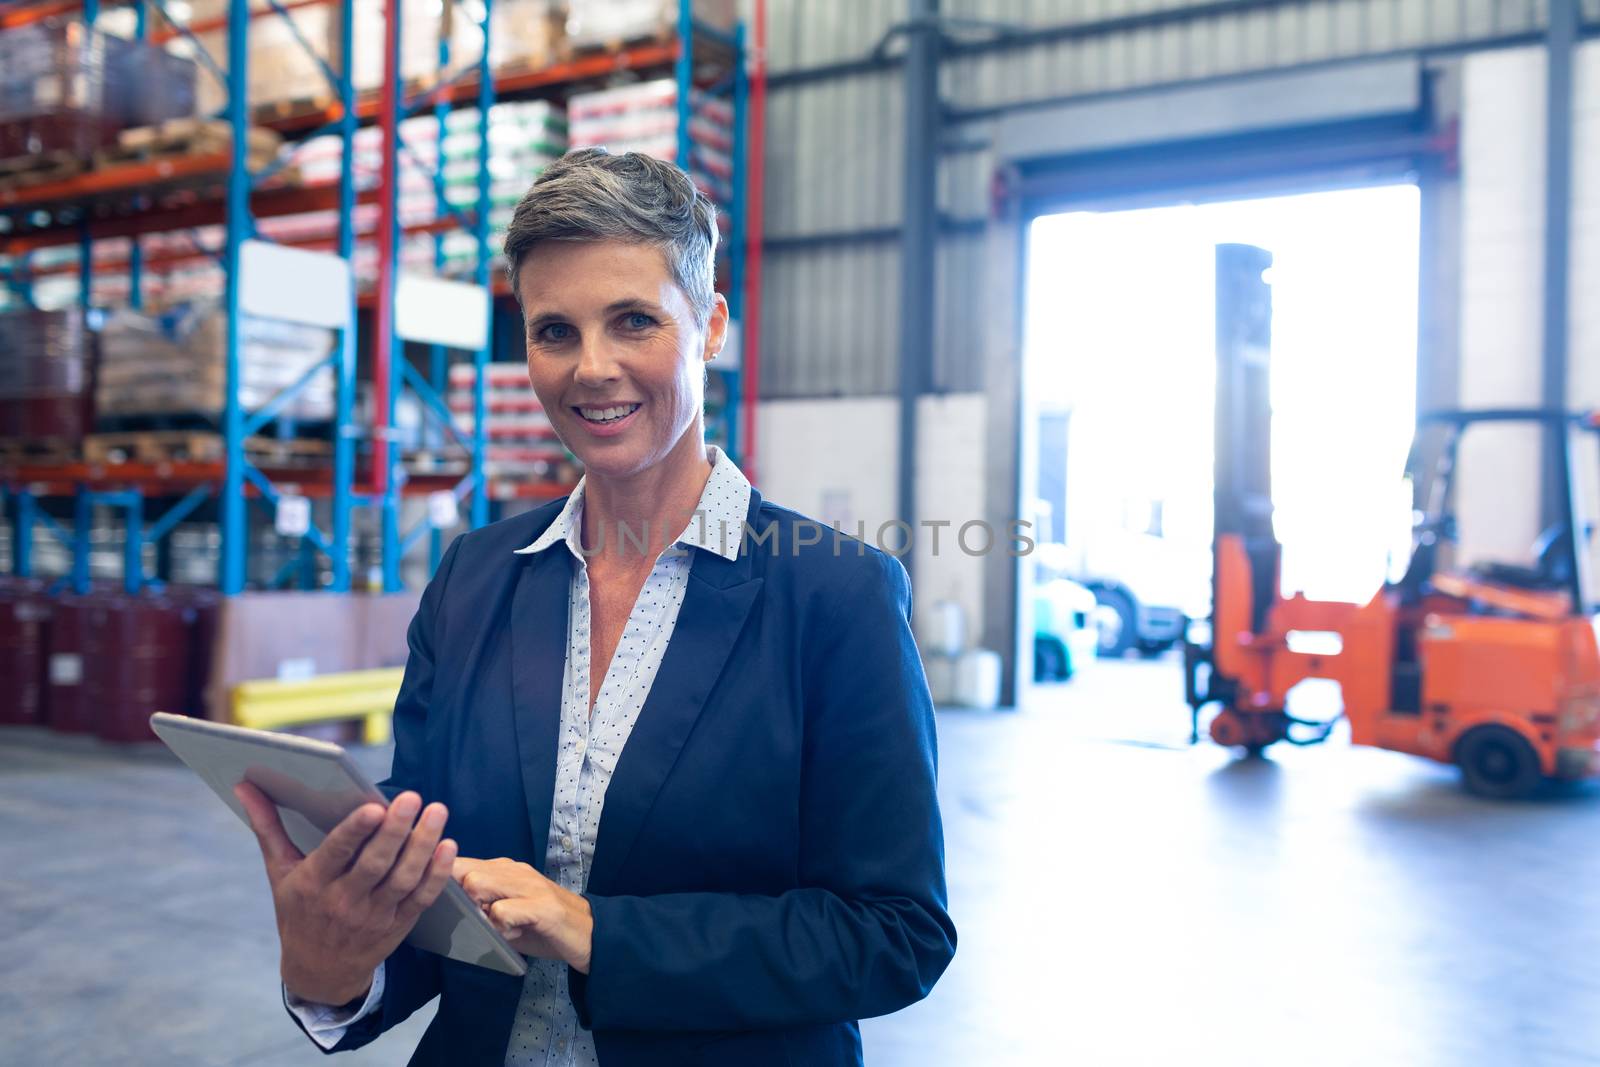 Portrait of beautiful mature Caucasian female manager looking at camera while using digital tablet in warehouse. This is a freight transportation and distribution warehouse. Industrial and industrial workers concept